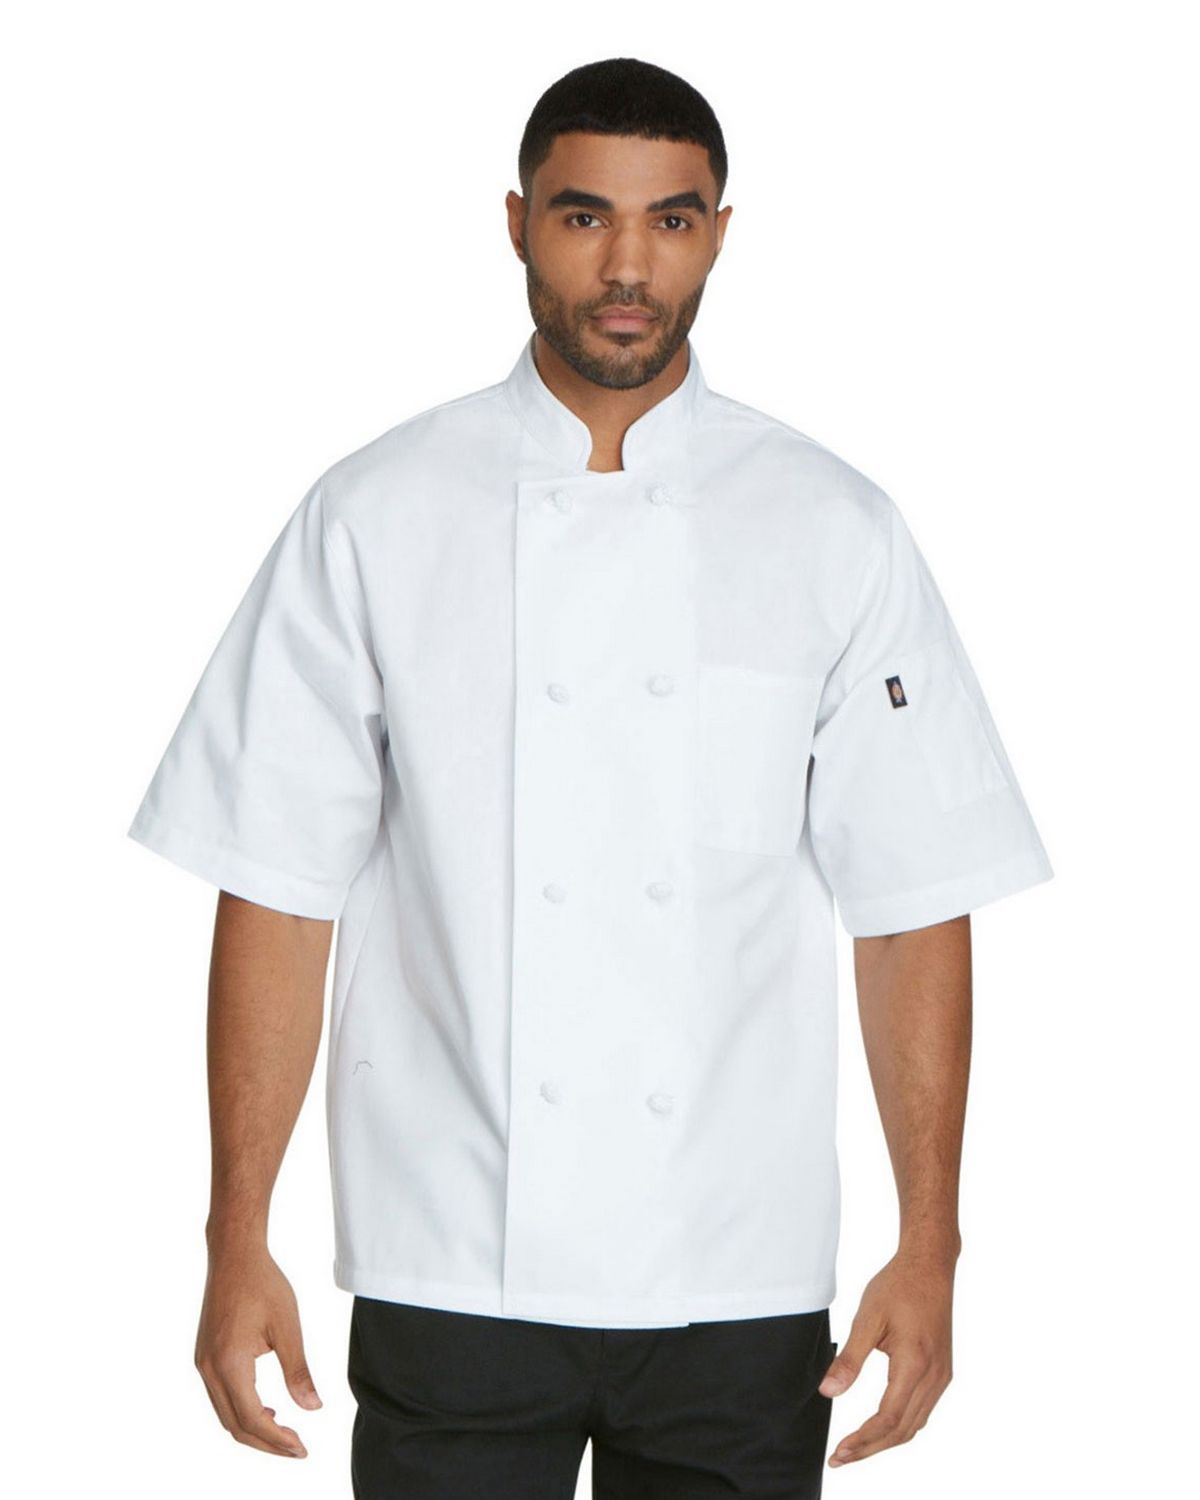 X-Large White Details about   Dickies Covered Button Chef Coat 